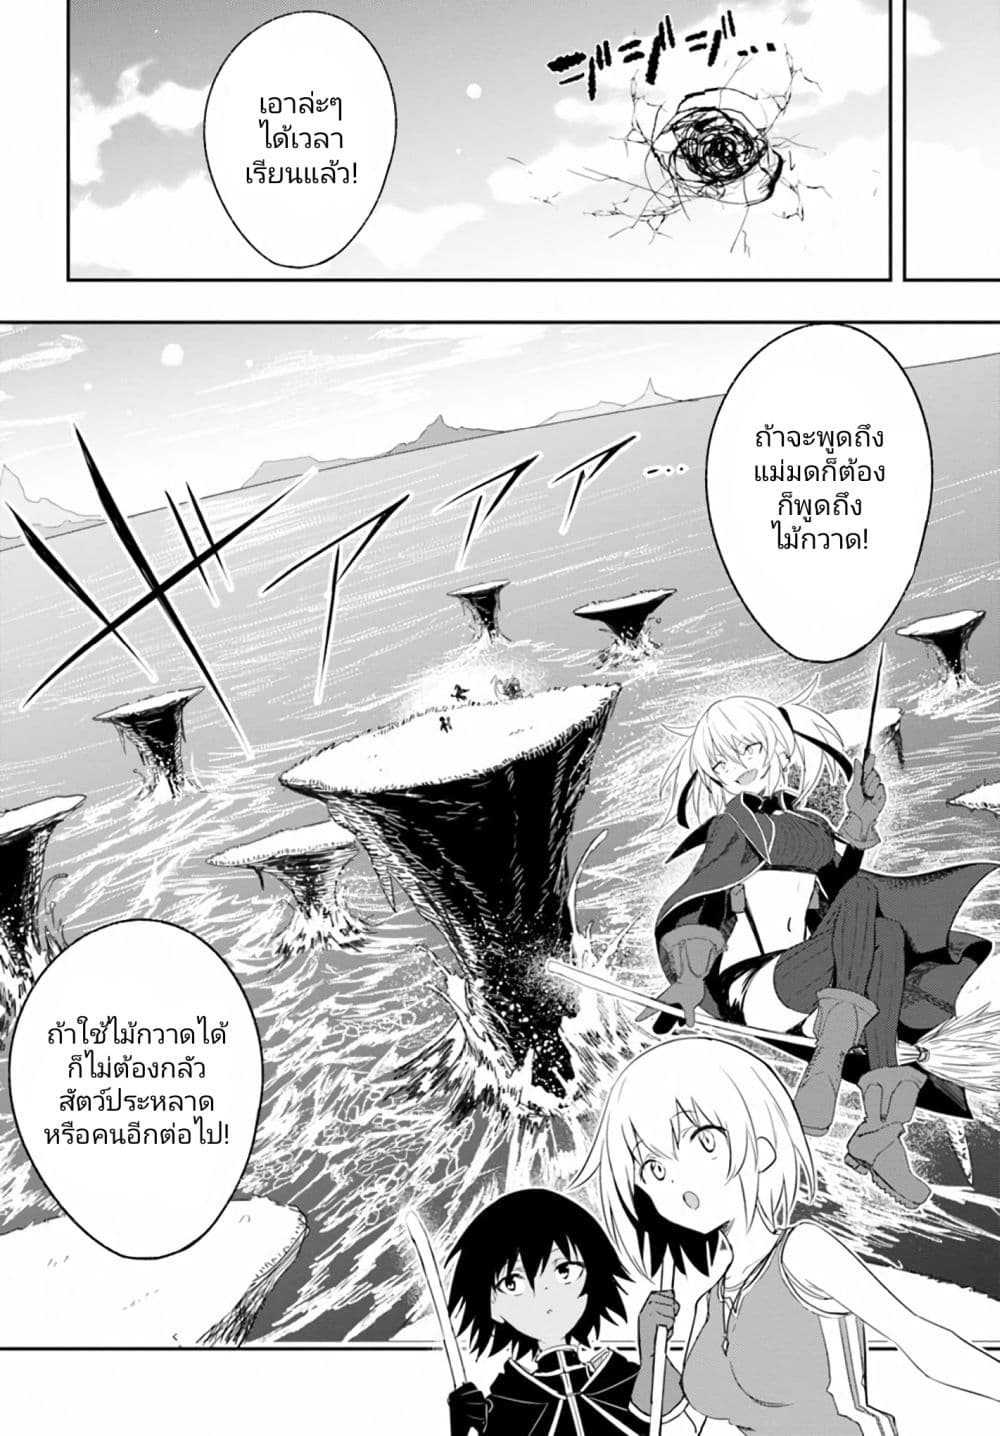 Witch Guild Fantasia 6 (16)